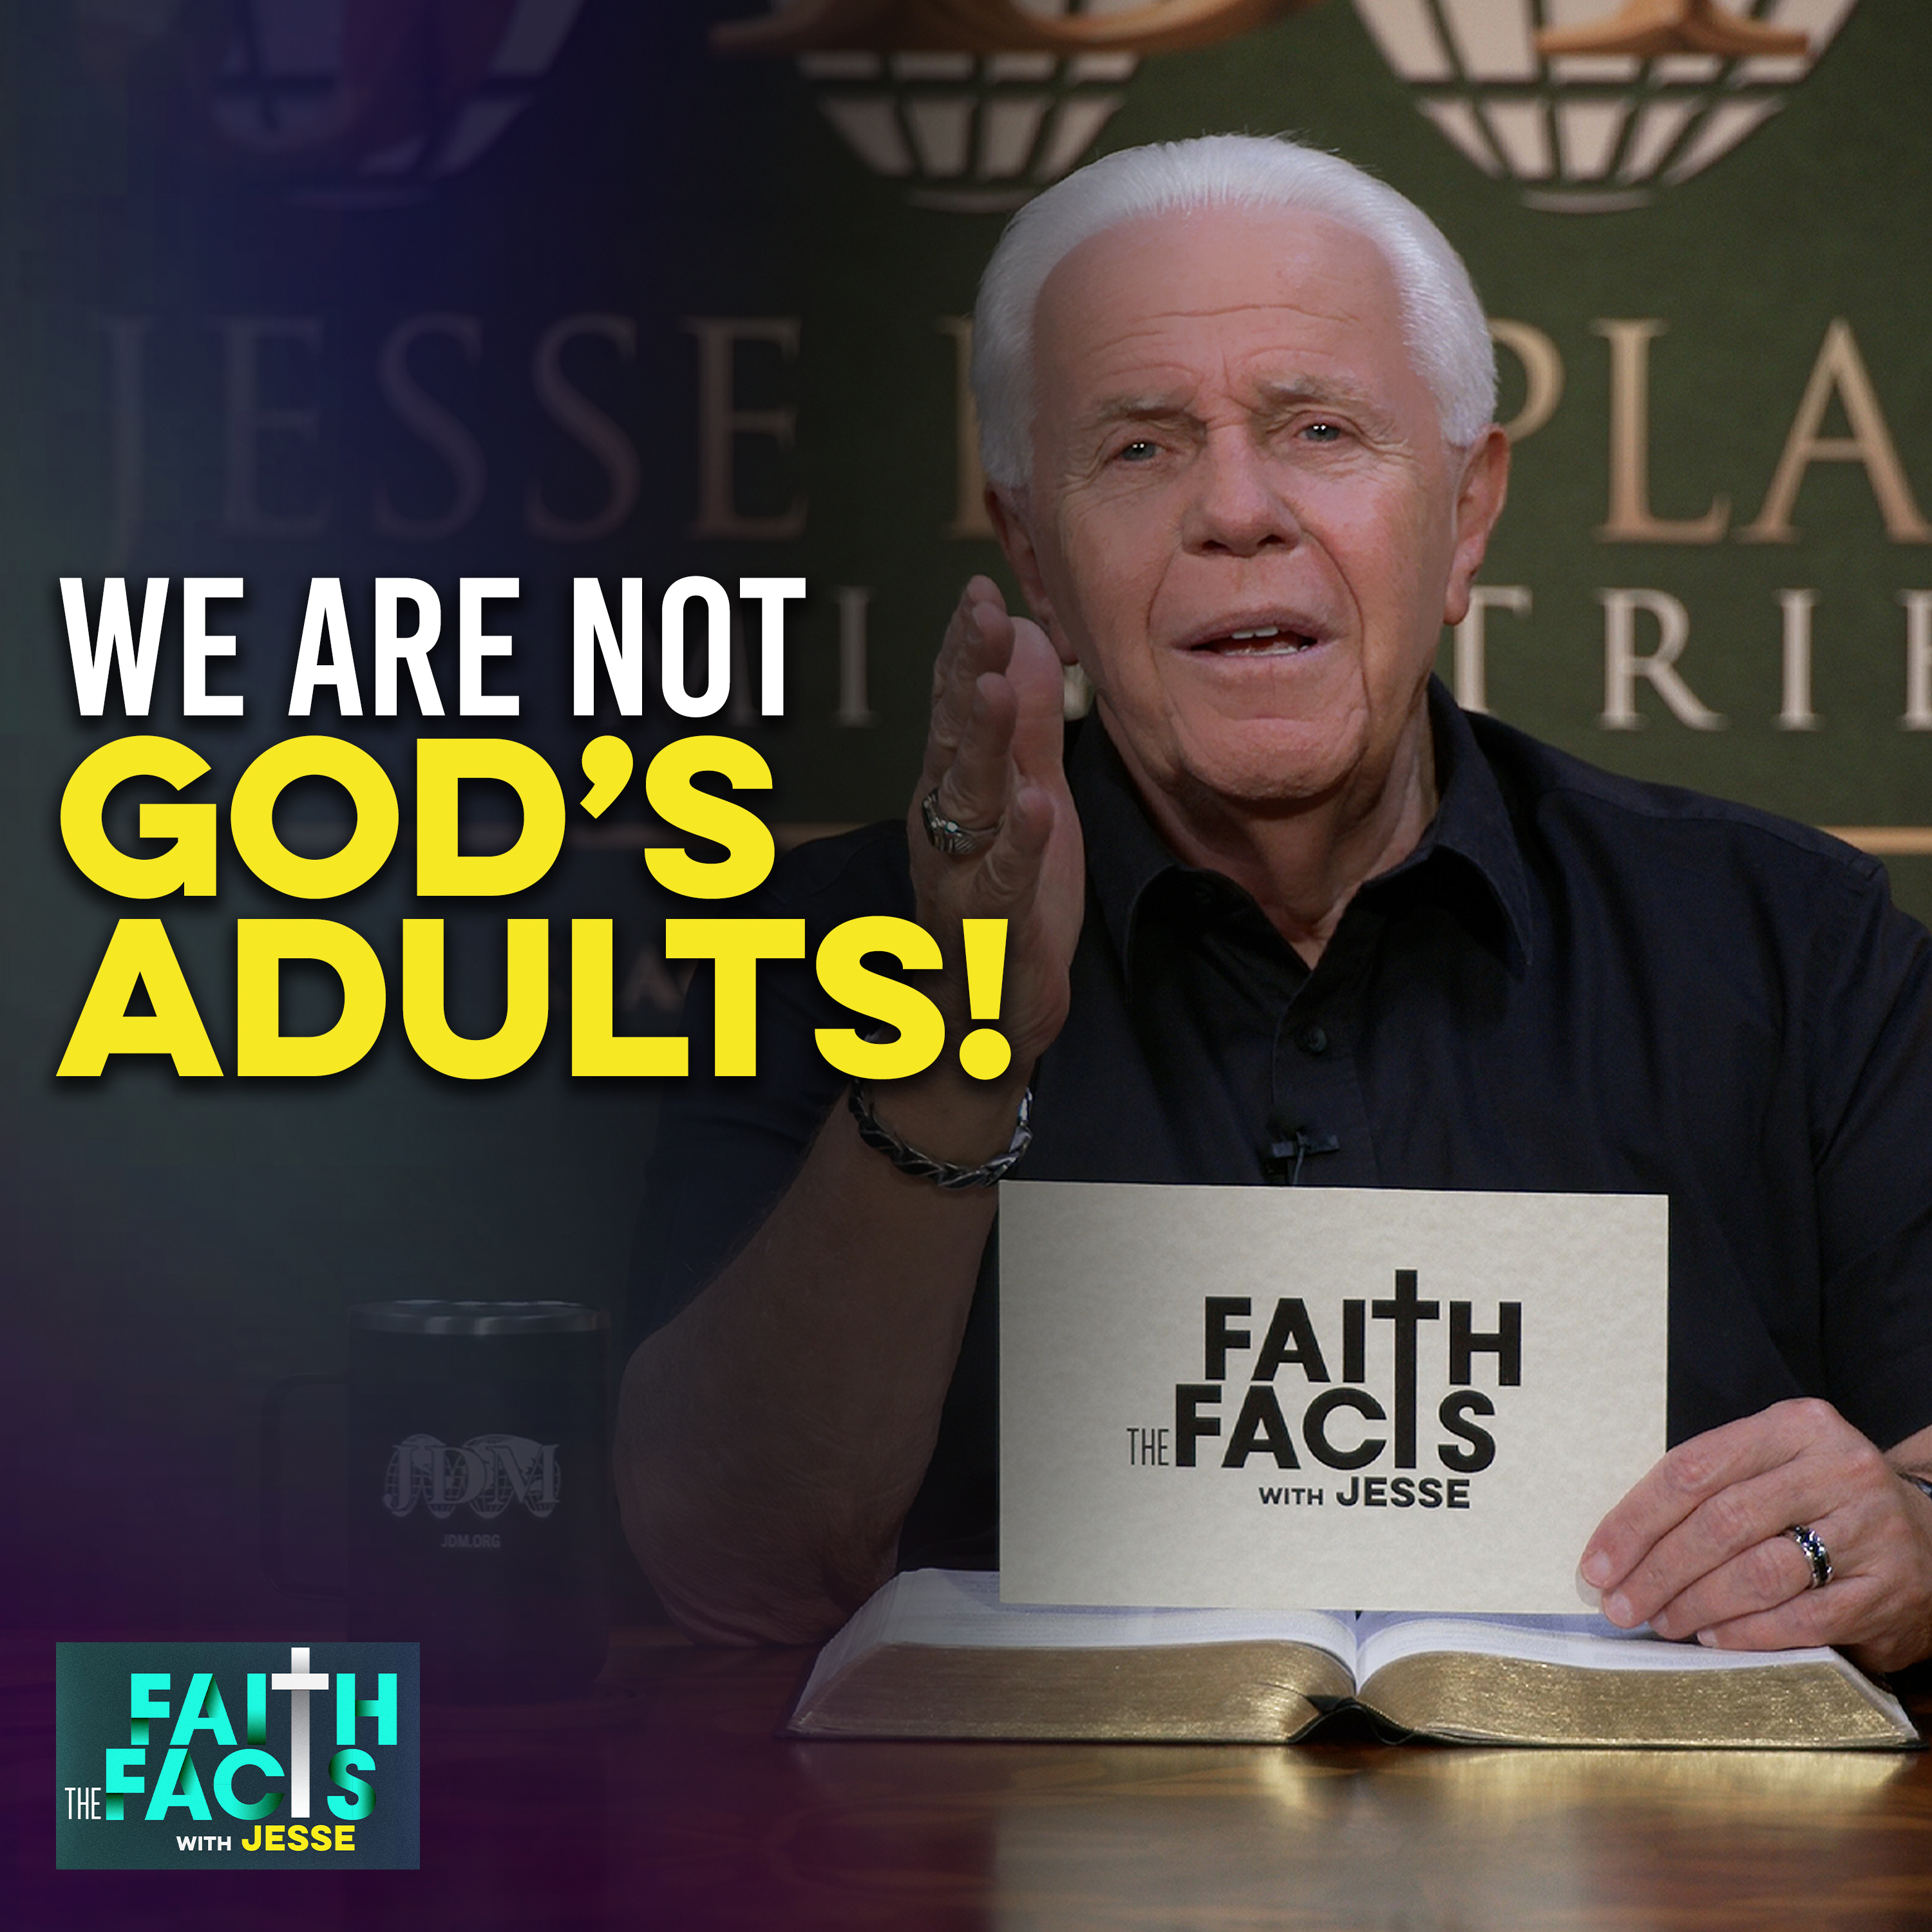 We Are Not God’s Adults!